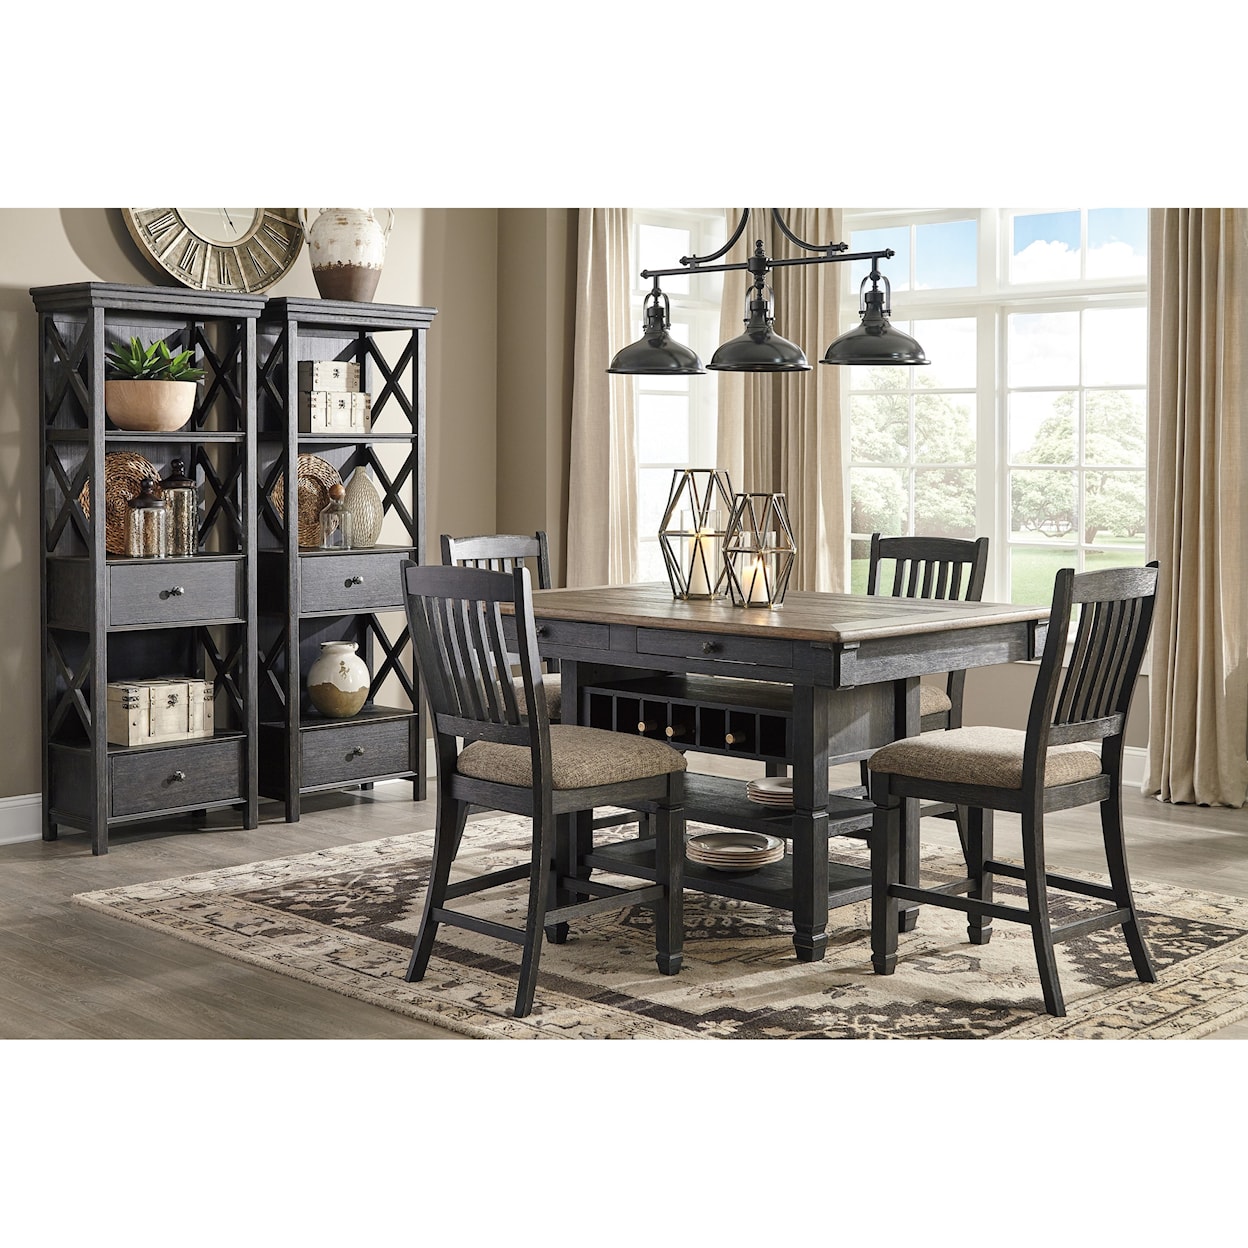 Benchcraft Tyler Creek Casual Dining Room Group